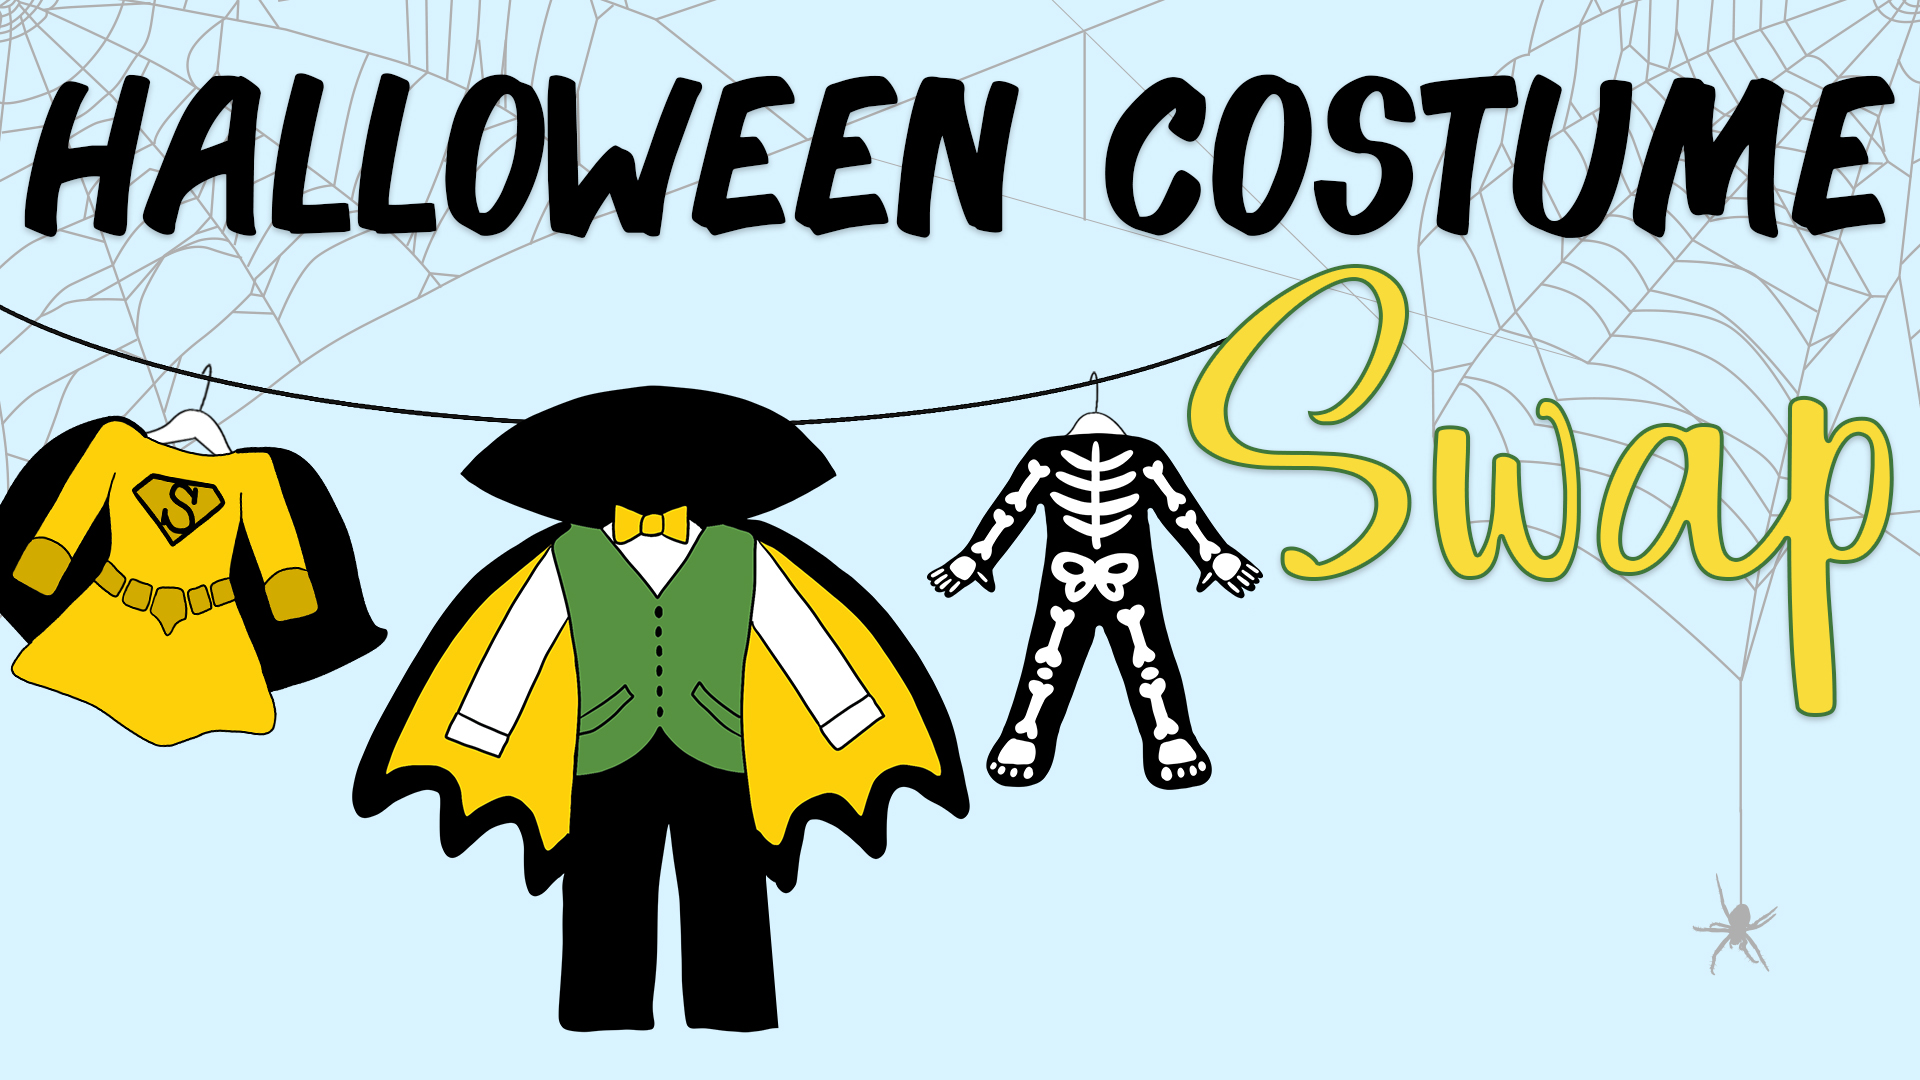 Image reads "Halloween Costume Swap" against a blue background. A clothesline is to the left of the title with a superhero, vampire, and skeleton costume hanging up.